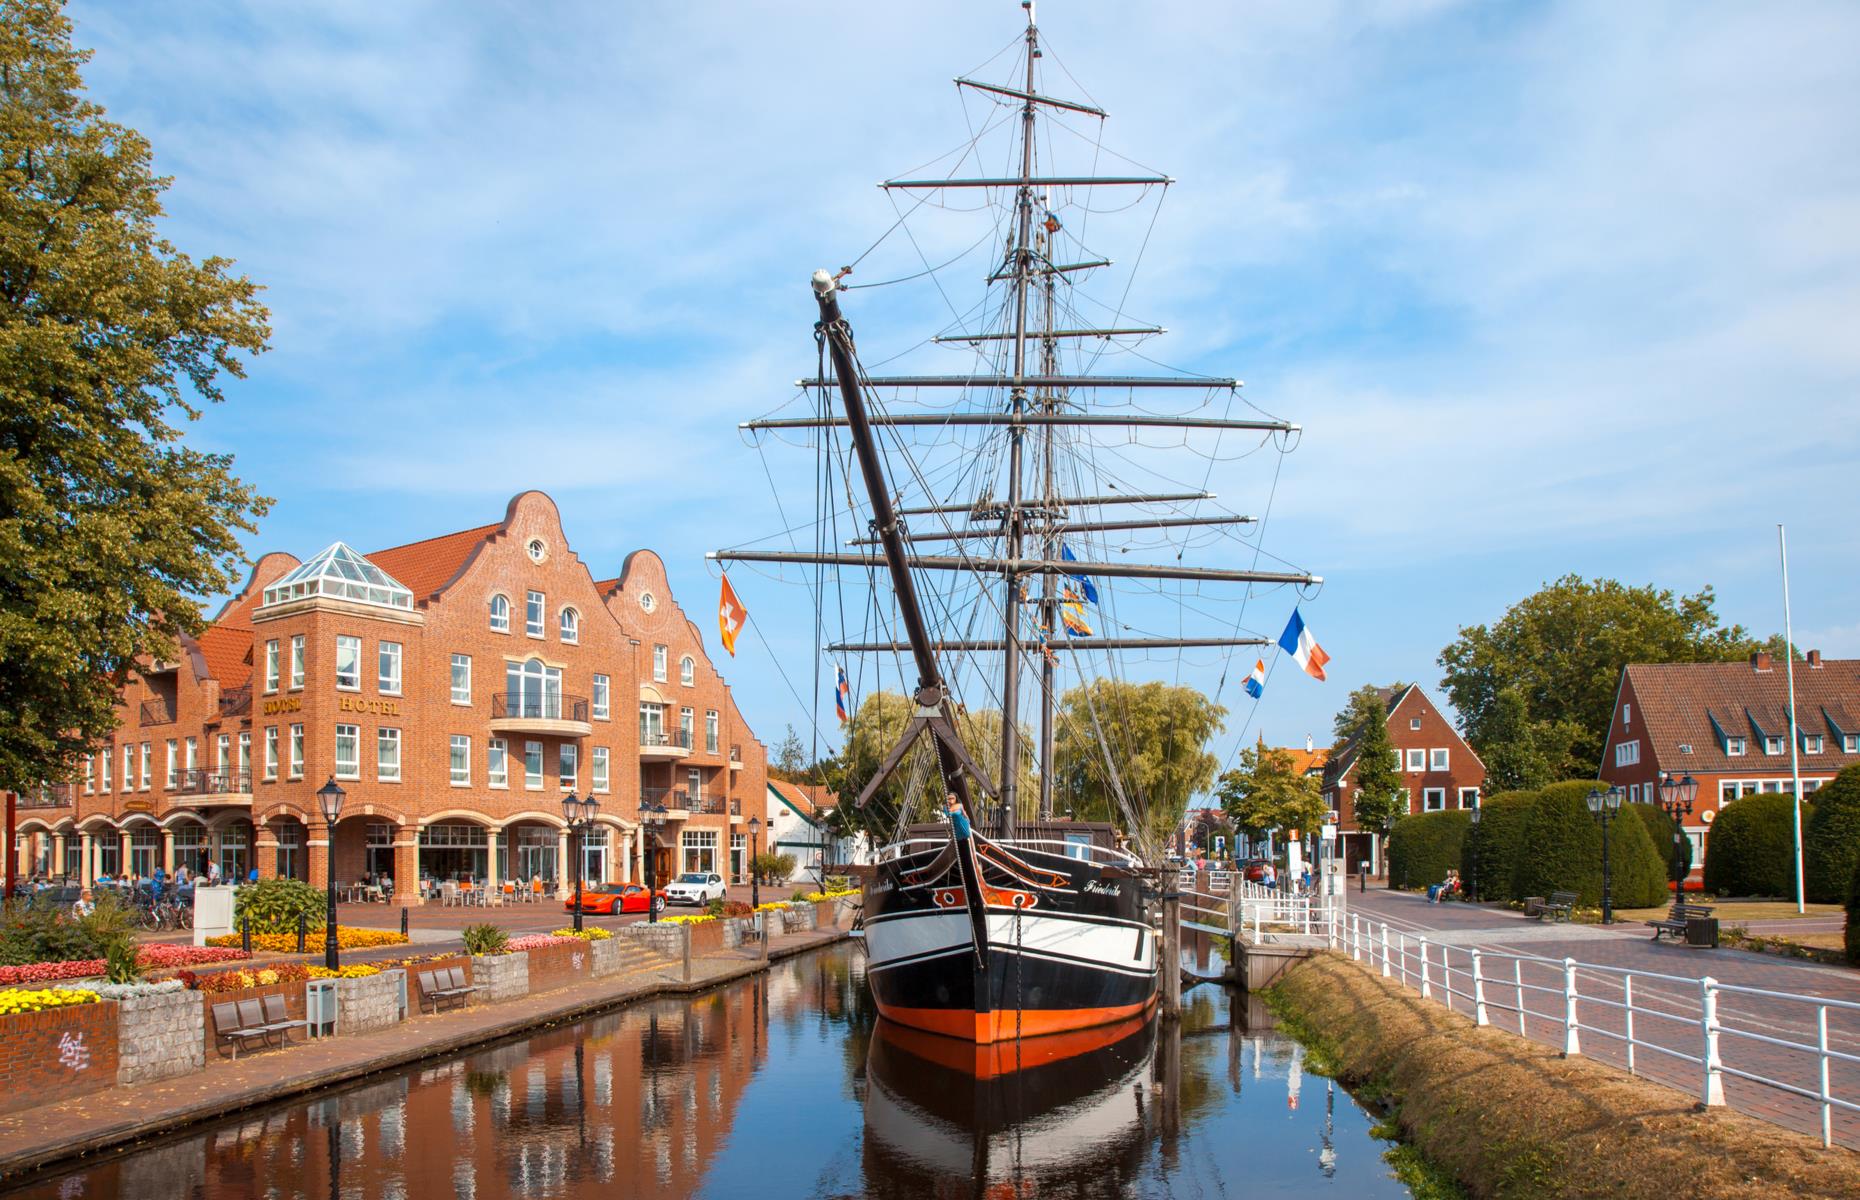 <p>The views are unrelentingly glorious, from meadows with picture-book windmills to nature reserves. Back in <a href="https://www.niedersachsen-tourism.com/destinations/cities-in-lower-saxony/papenburg">Papenburg</a>, a vibrant port city known for shipbuilding, several museums trace the history of sailing and the shipping industry in the region. The city is also laced with canals, crossed by bascule bridges (drawbridges) and dotted with permanently moored, historic ships (pictured).</p>